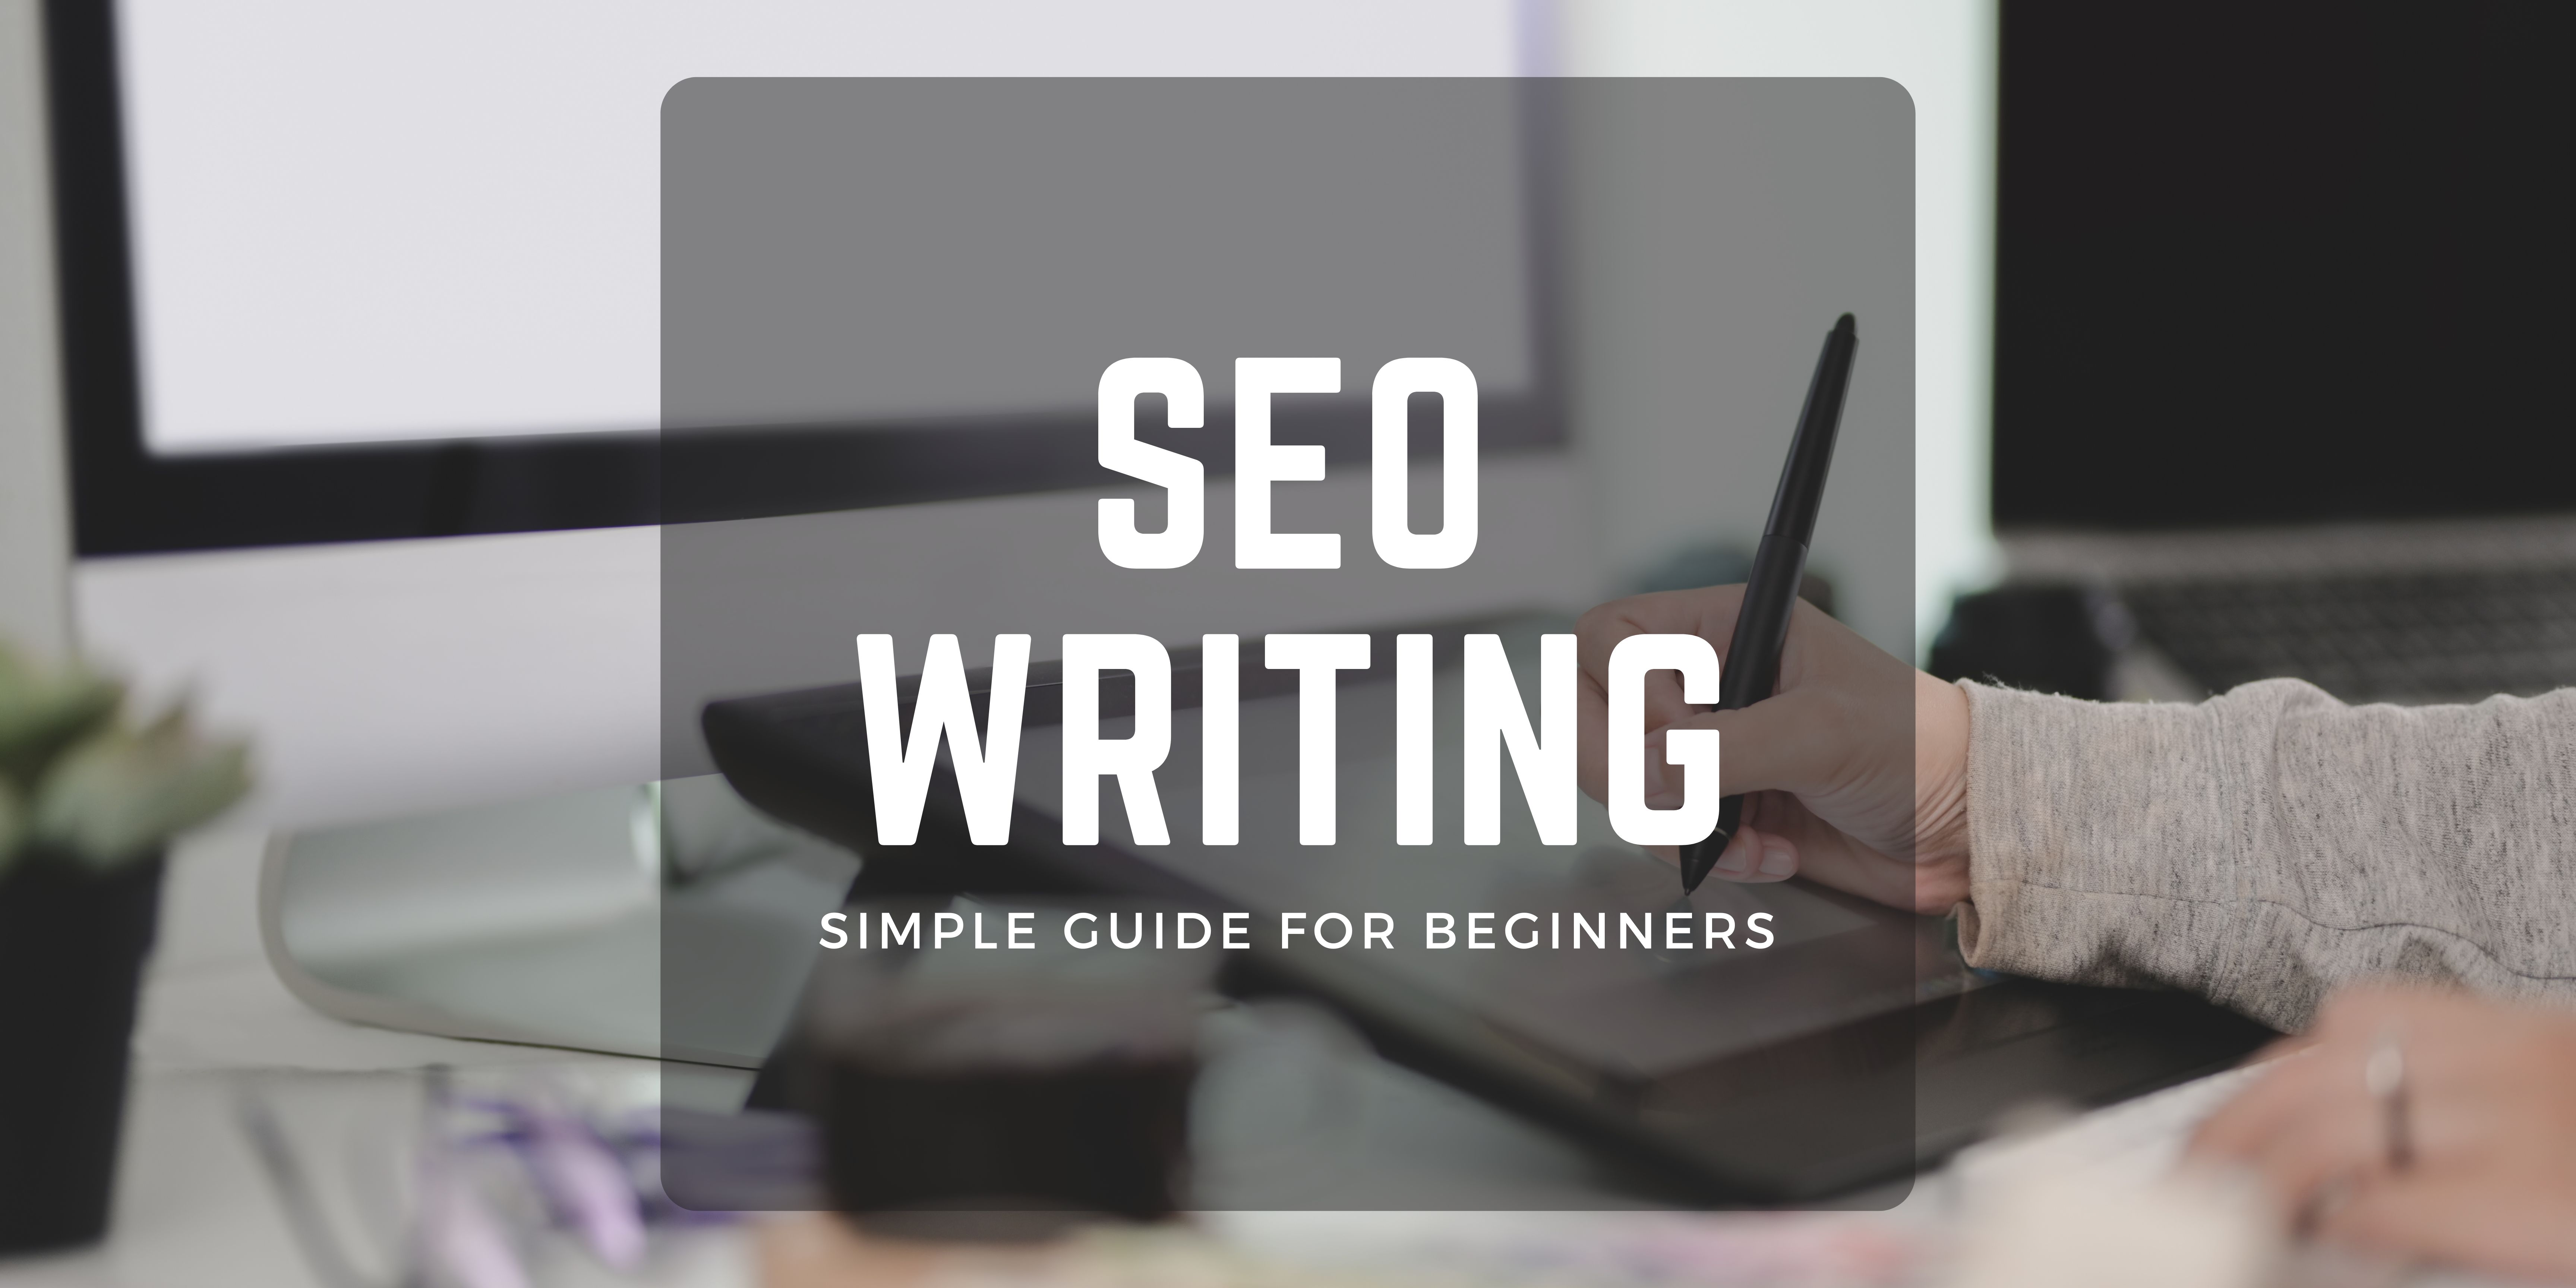 <strong>What is SEO Writing? Simple Guide for Beginners</strong>